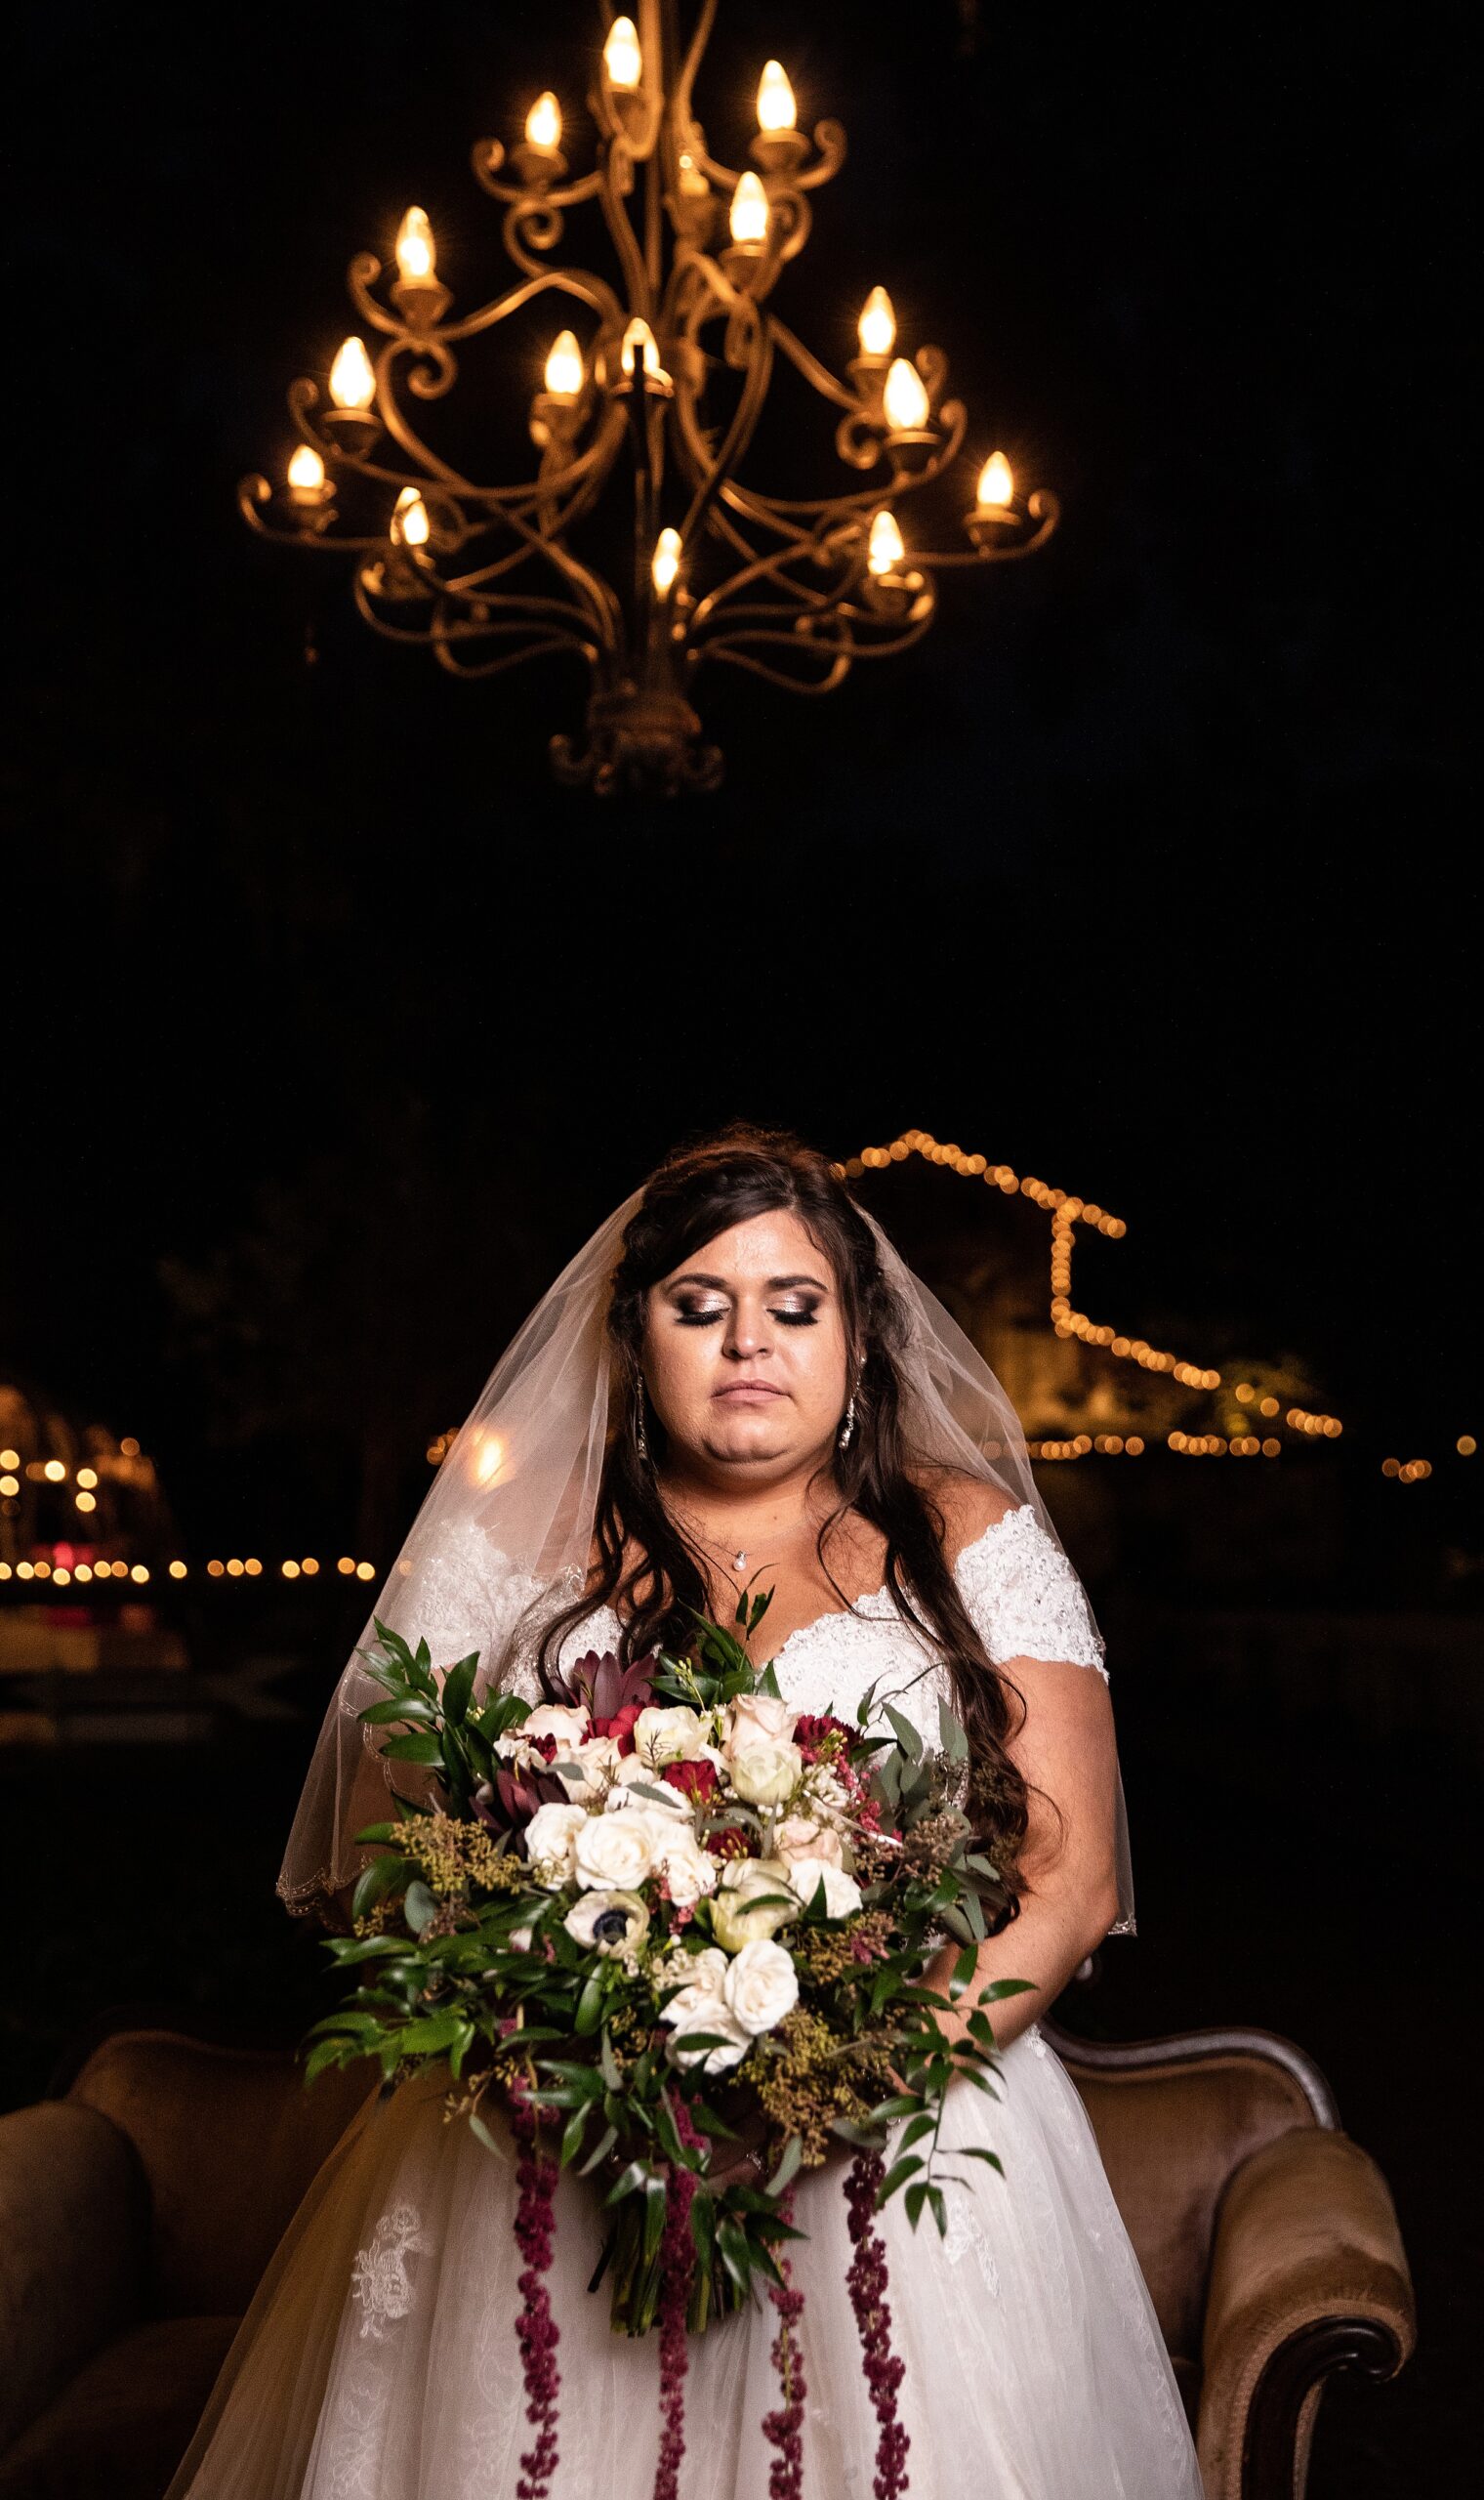 A bride stands with eyes closed under an outdoor chandelier holding her colorful large bouquet